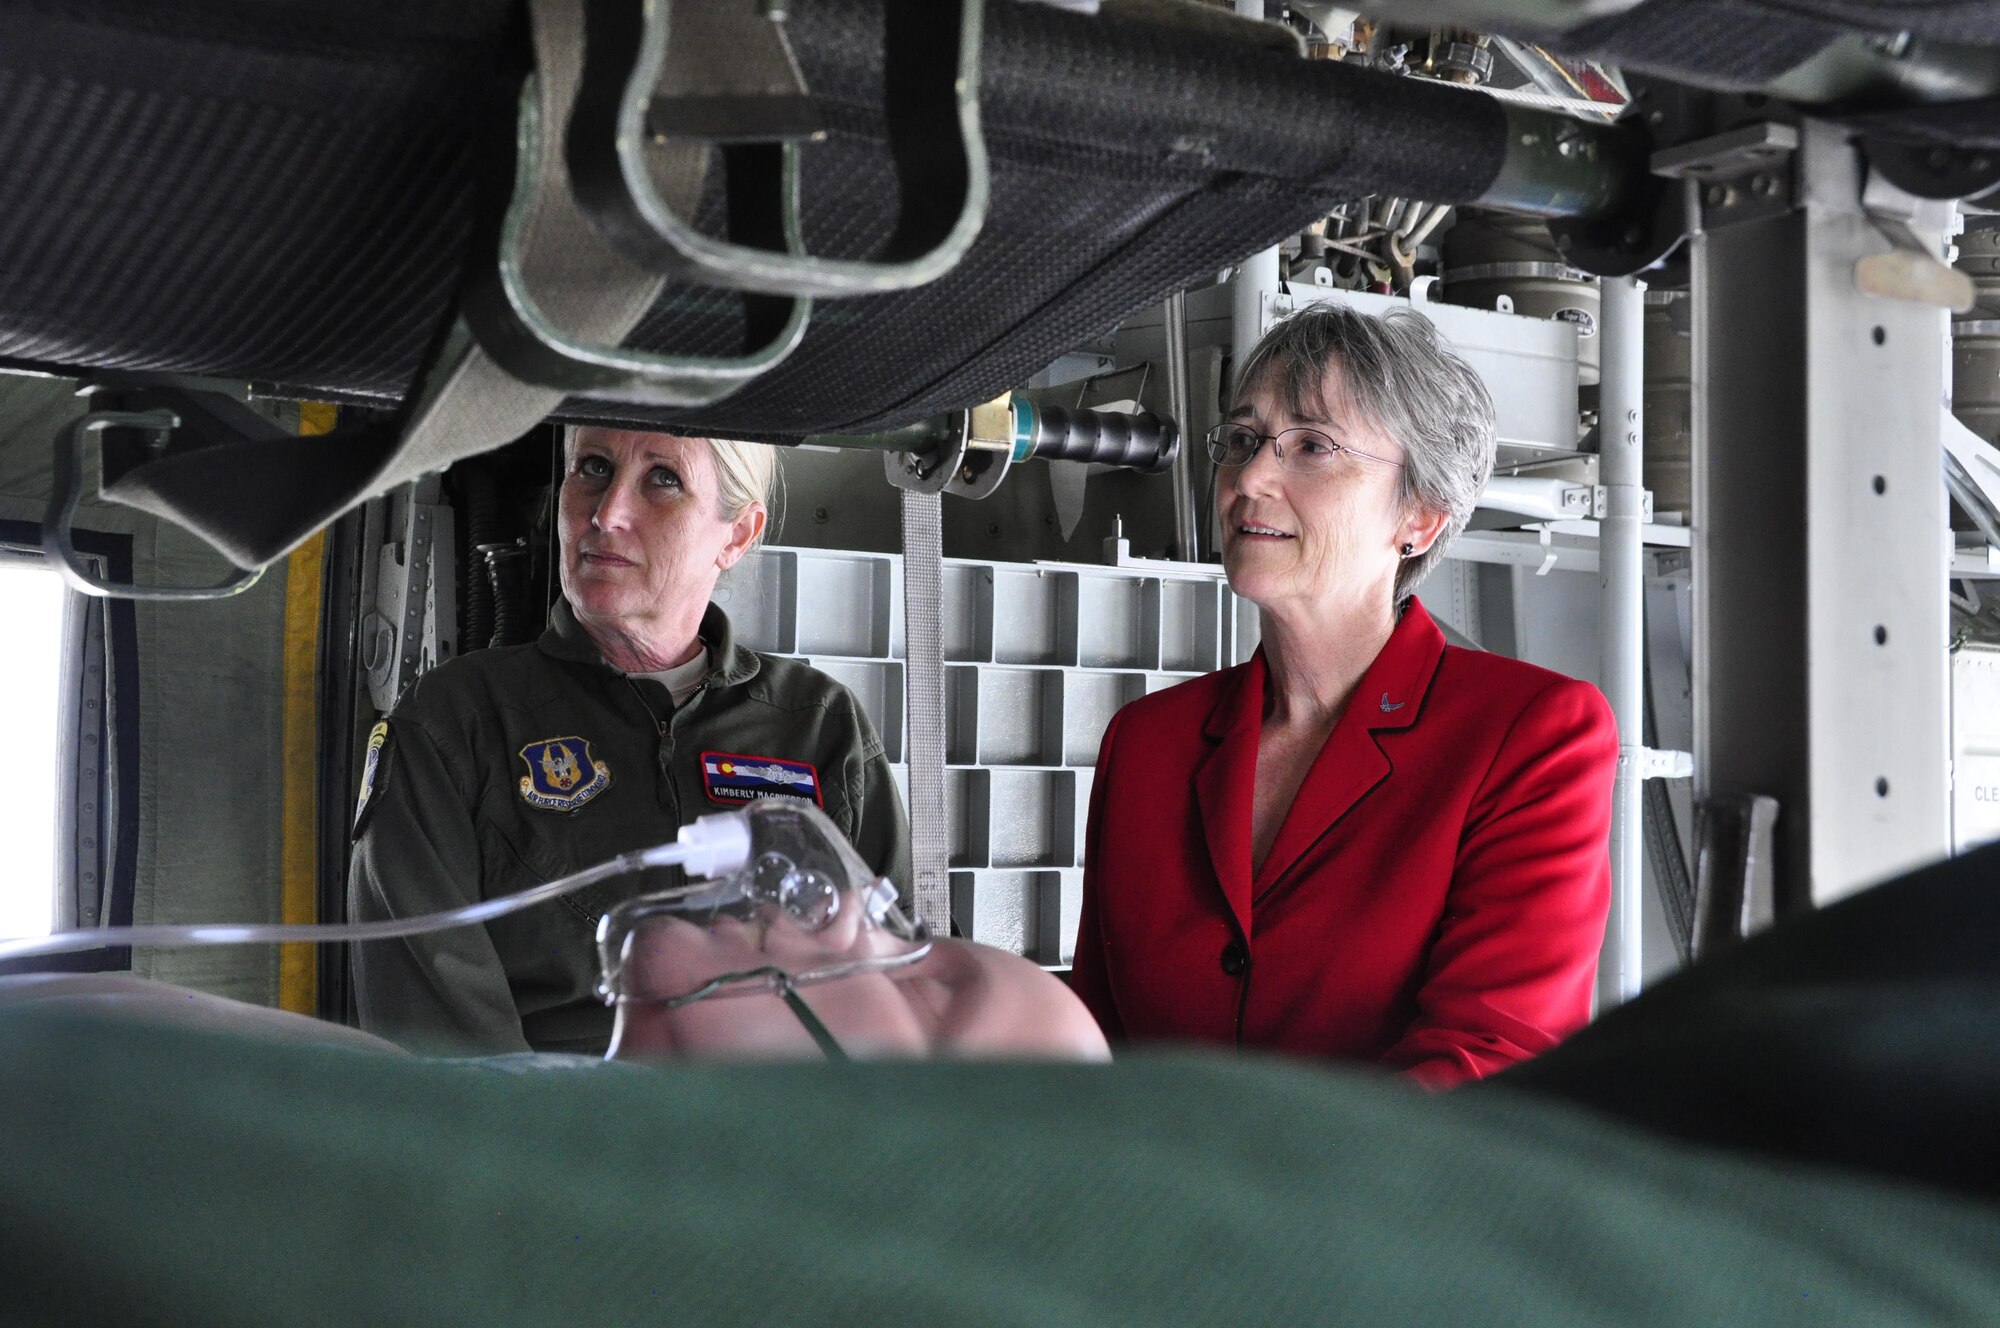 Lt. Col. Kimberly MacPherson, the 34th Aeromedical Evacuation Squadron director of operations and flight nurse, briefs Secretary of the Air Force Heather Wilson on the 302nd Airlift Wing’s capabilities and contributions to the U.S. Air Force’s aeromedical evacuation mission. The secretary had the opportunity to view up-close a portable U.S. Forest Service Modular Airborne Fire Fighting System used during 302nd AW C-130 MAFFS missions and meet with Reserve Citizen Airmen from the wing’s 34th Aeromedical Evacuation Squadron, 302nd Security Forces Squadron and 302nd Operations Group. The May 22, 2017 visit to Peterson Air Force Base was the first official base visit for Wilson as Secretary of the Air Force. (U.S. Air Force photo/Staff Sgt. Frank Casciotta)